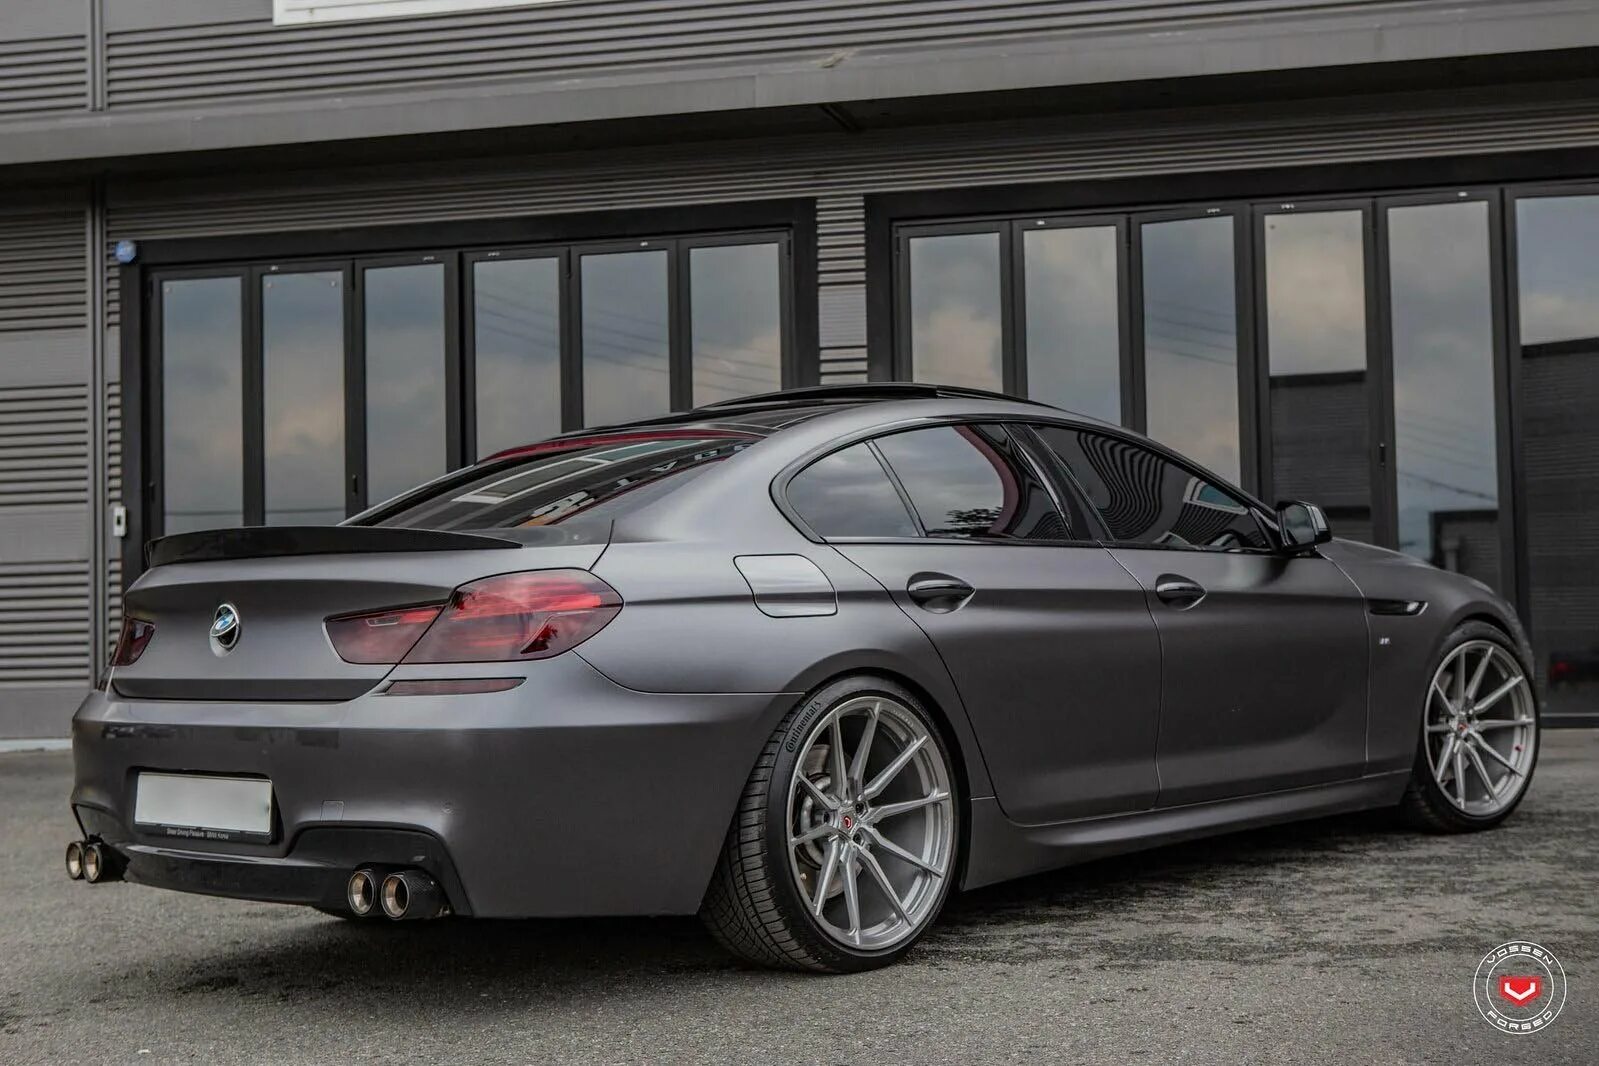 BMW m6 Gran Coupe. BMW m6 f06. BMW m6 f13 Coupe. BMW 6 f06 Gran Coupe.